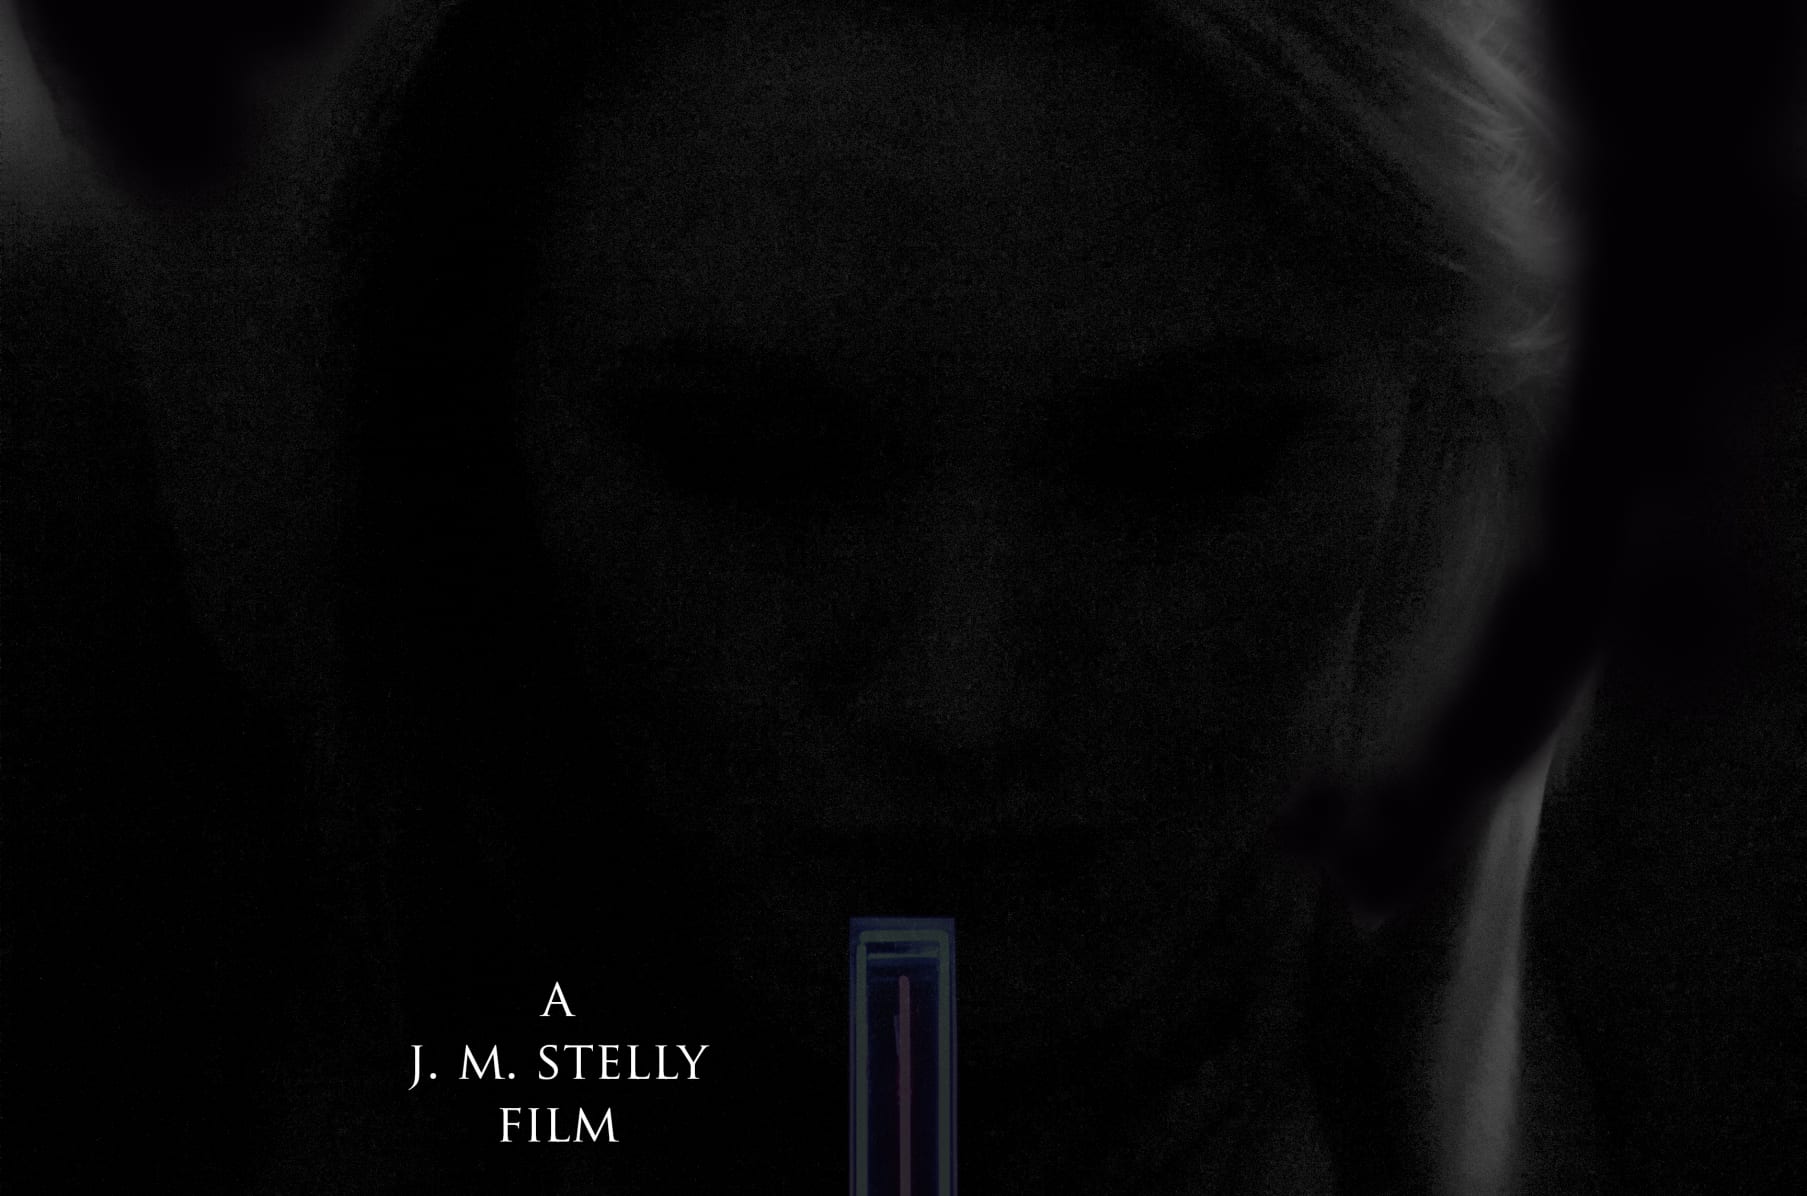 An Evening with J.M. Stelly